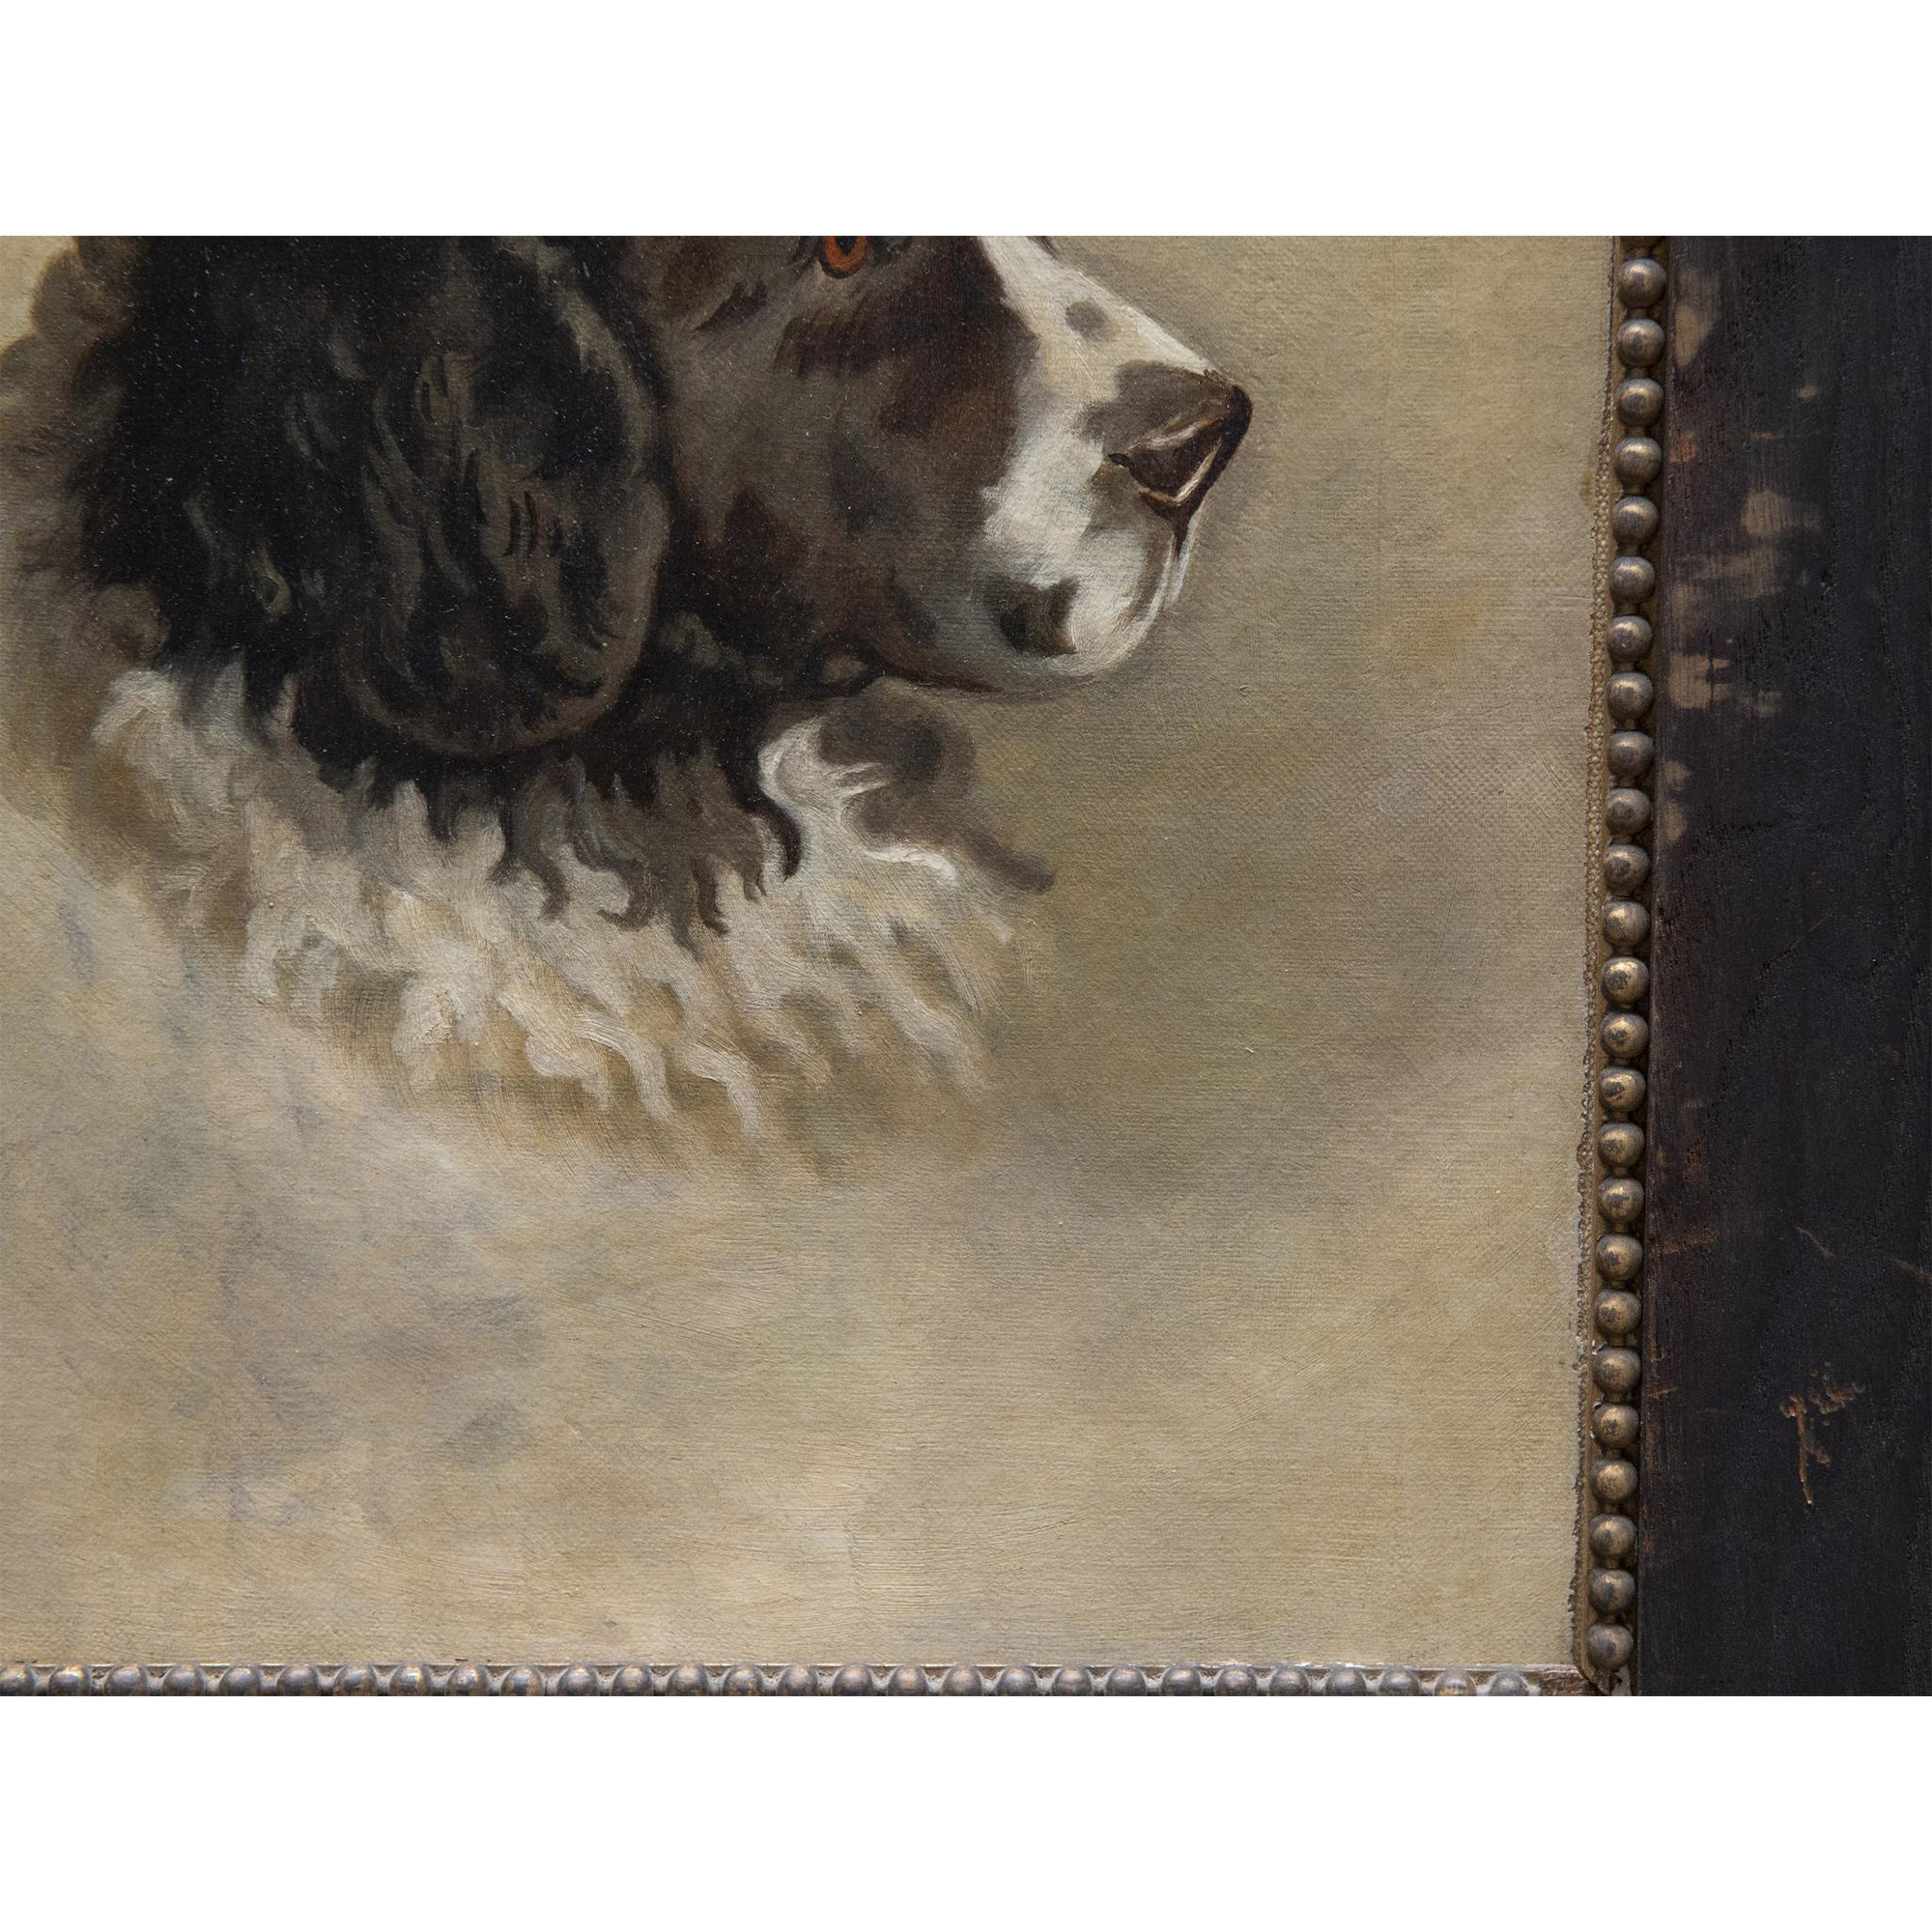 Original Oil on Canvas, Large Portrait of a English Spaniel - Image 3 of 5